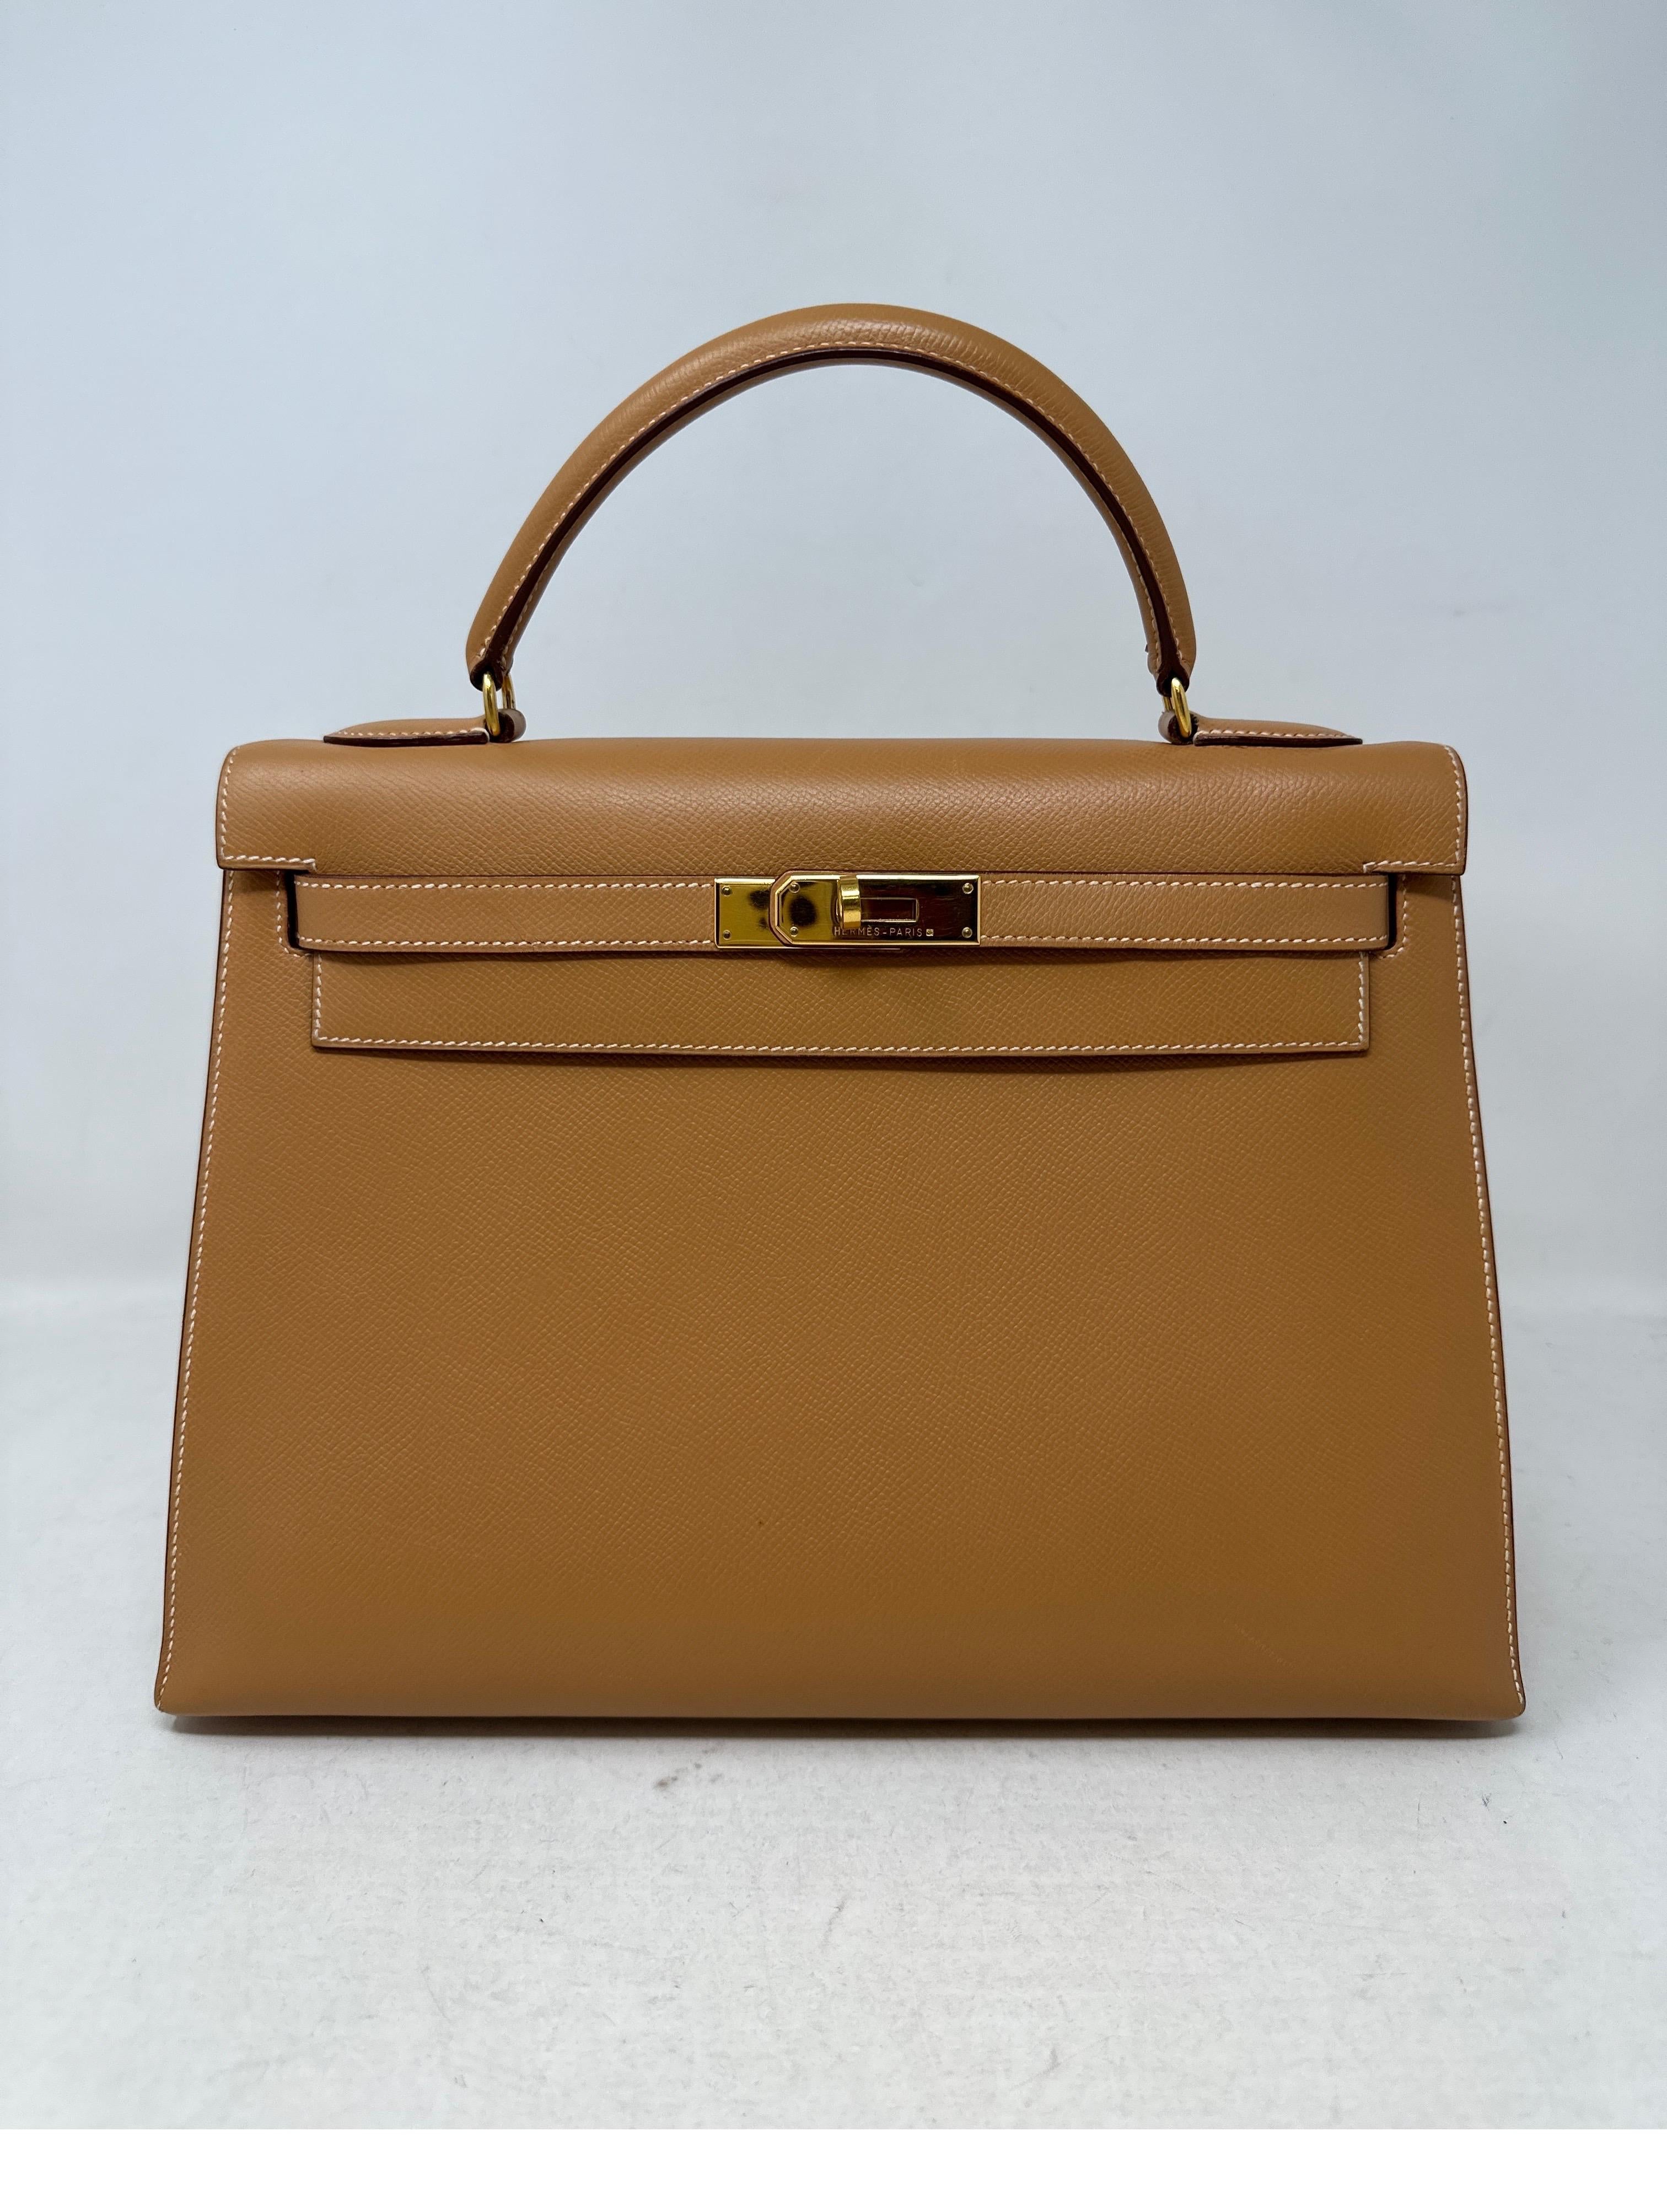 Hermes Natural Tan Kelly Sellier 32 Bag. Lighter than gold color tan in sellier. Most wanted combination. Gold hardware. Vintage Kelly in excellent condition. Interior clean. Excellent condition. Includes clochette, lock, keys, and dust bag. Sellier